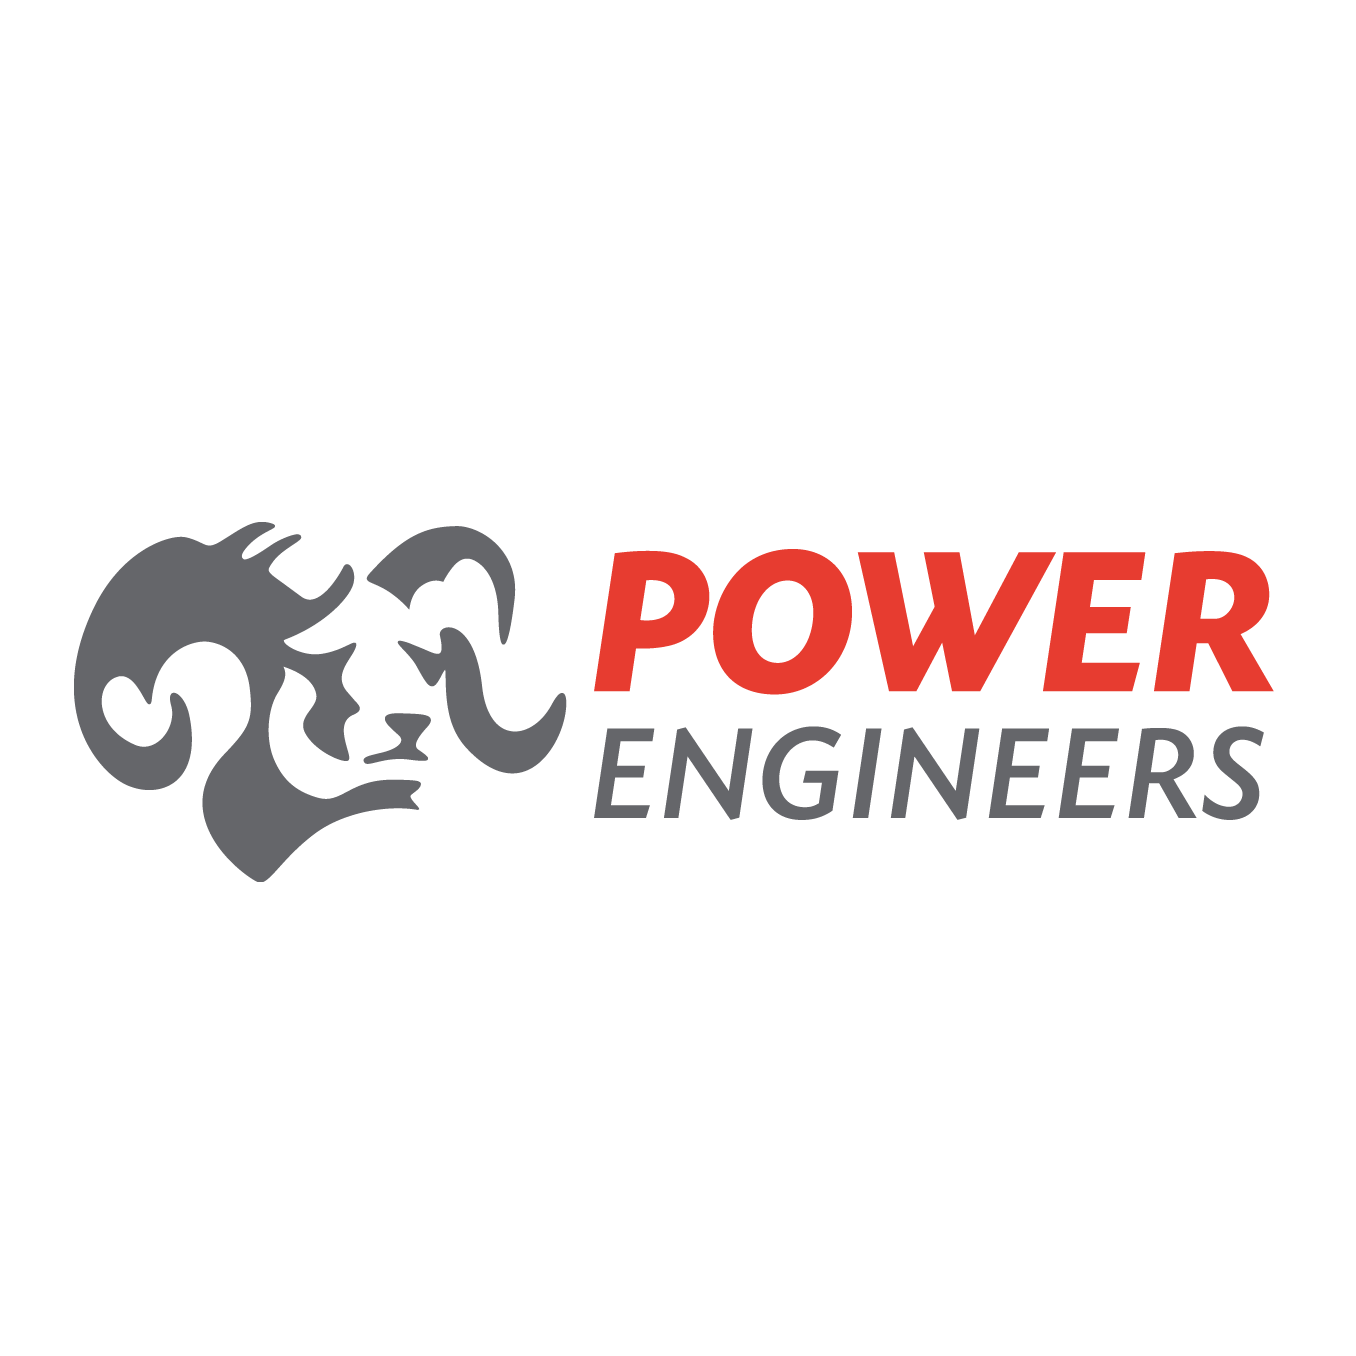 Power Engineers Square Logo.png